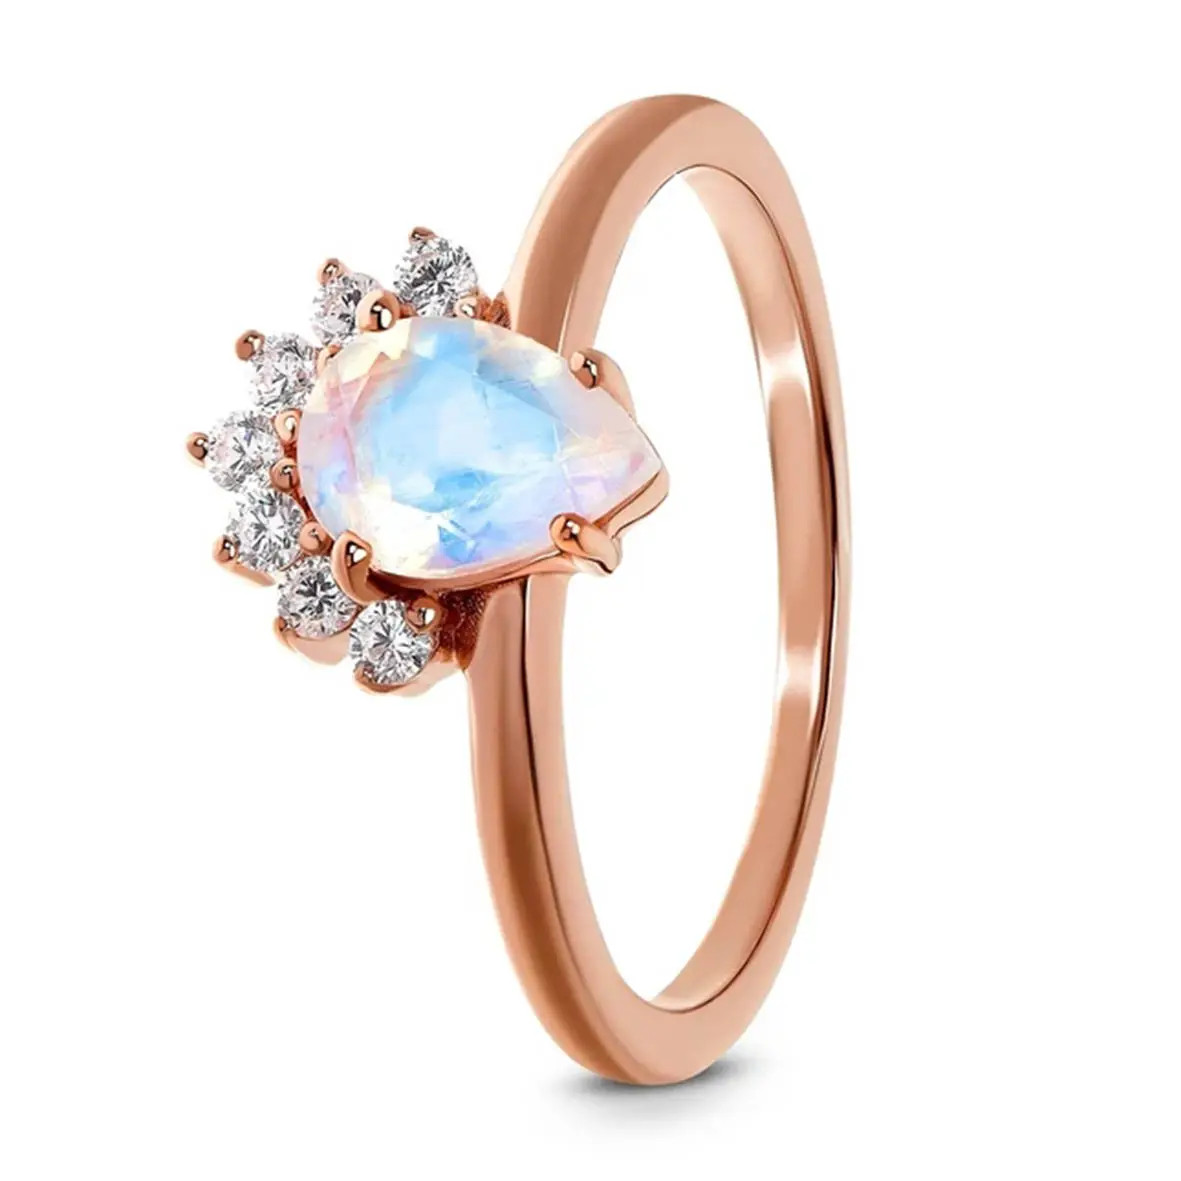 New Design Tiny Jewelry 925 Sterling Silver 14 18k Rose Gold Plated Pear Cut Natural Moonstone Dainty Ring For Girls